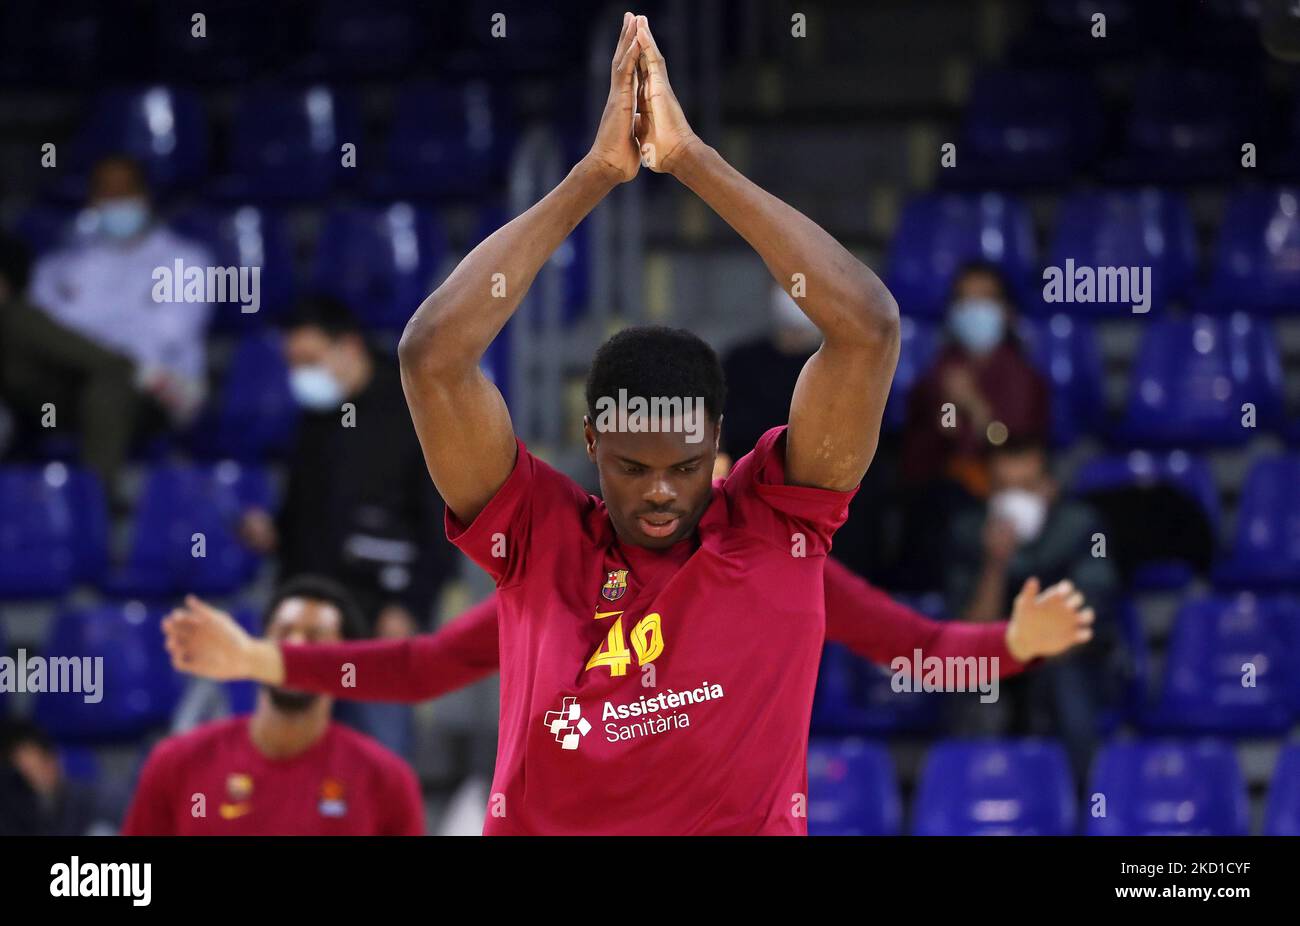 James Nnaji during the match between FC Barcelona and ASVEL Lyon-Villeurbanne, corresponding to the week 23 of the Euroleague, played at the Palau Blaugrana, on 27th January 2022, in Barcelona, Spain. -- (Photo by Urbanandsport/NurPhoto) Stock Photo